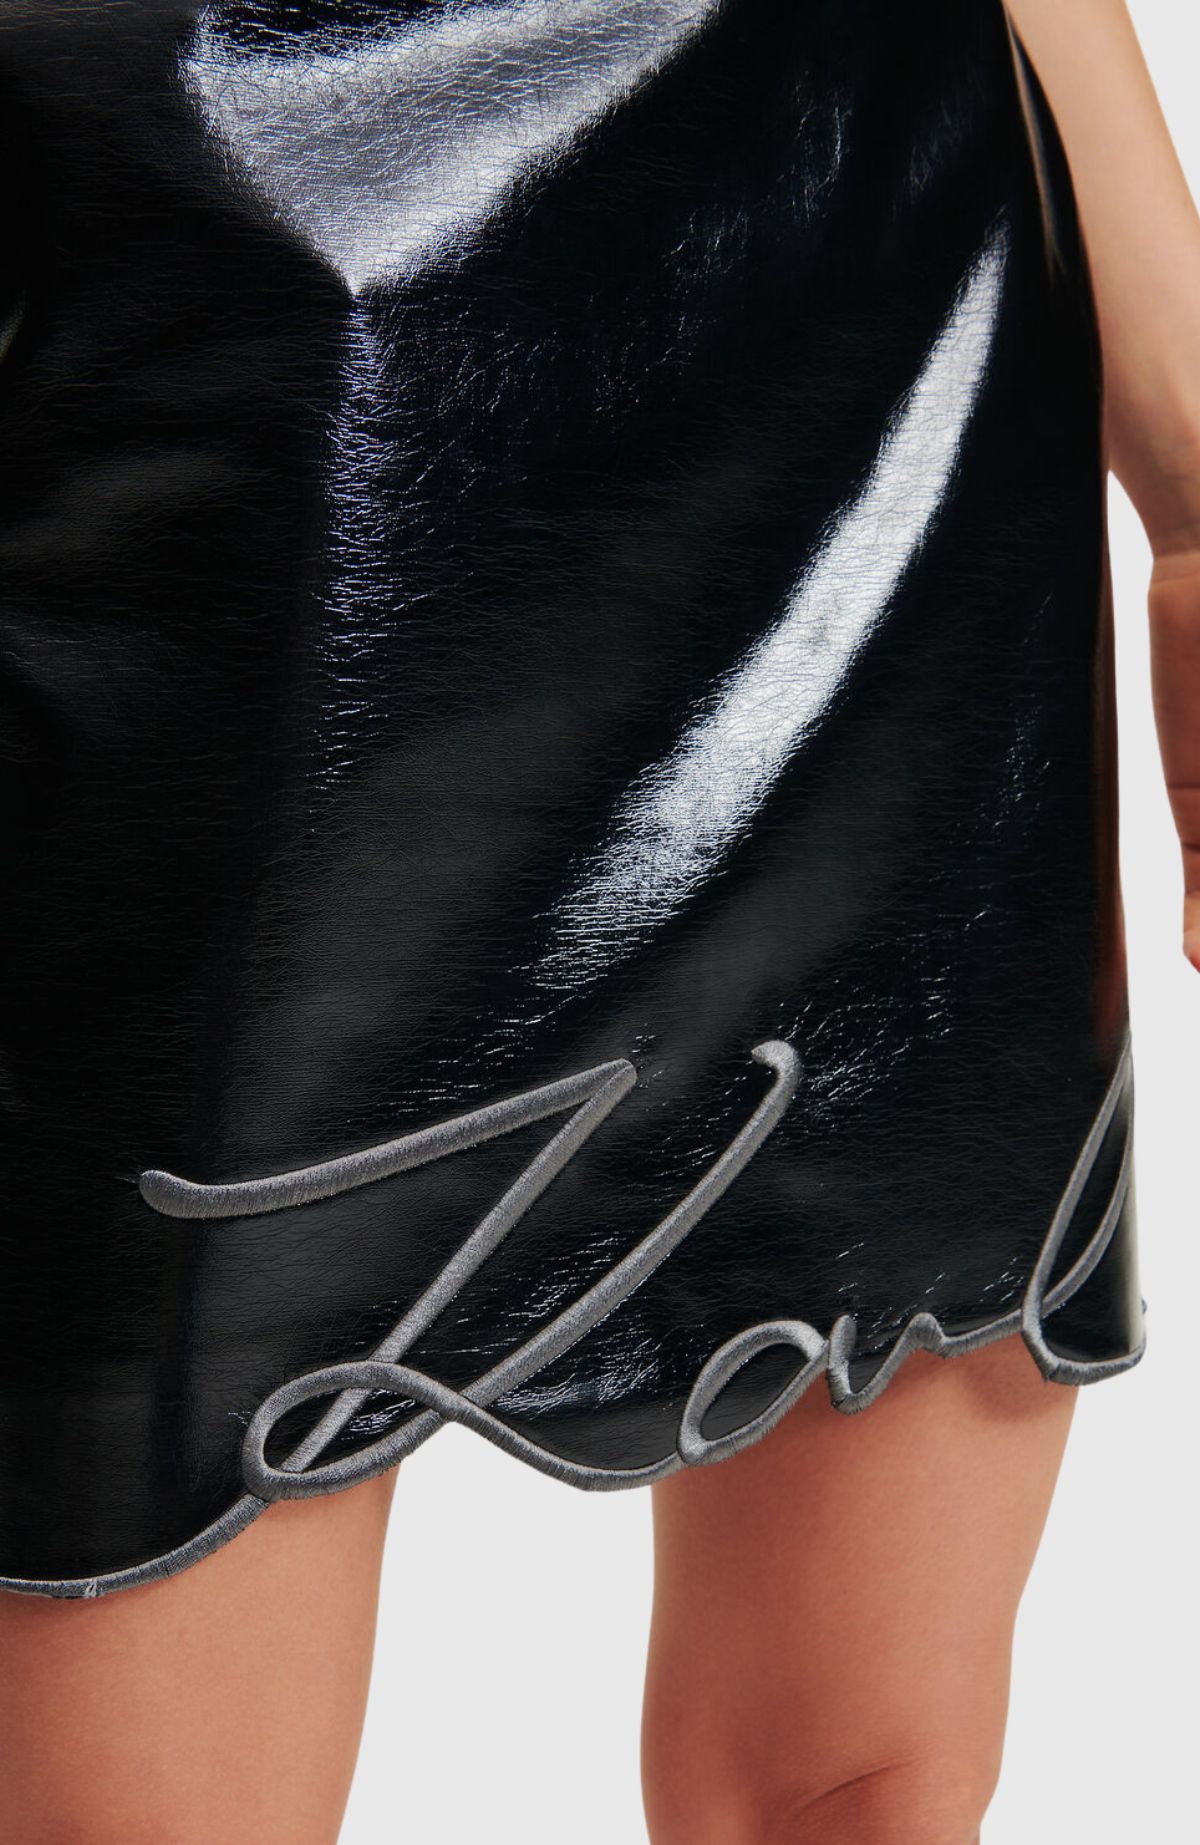 Patent Faux Leather Skirt